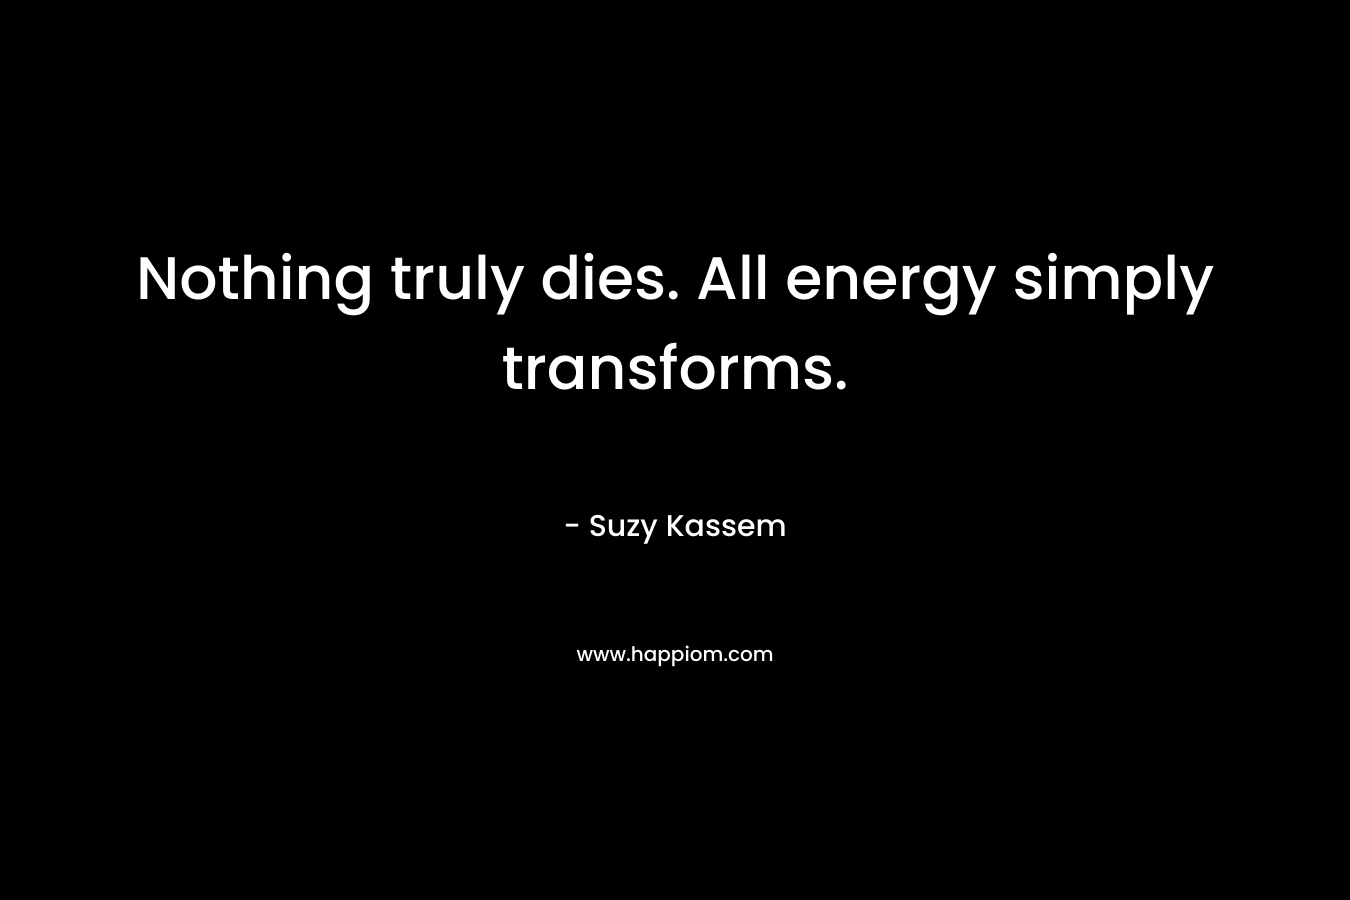 Nothing truly dies. All energy simply transforms. – Suzy Kassem